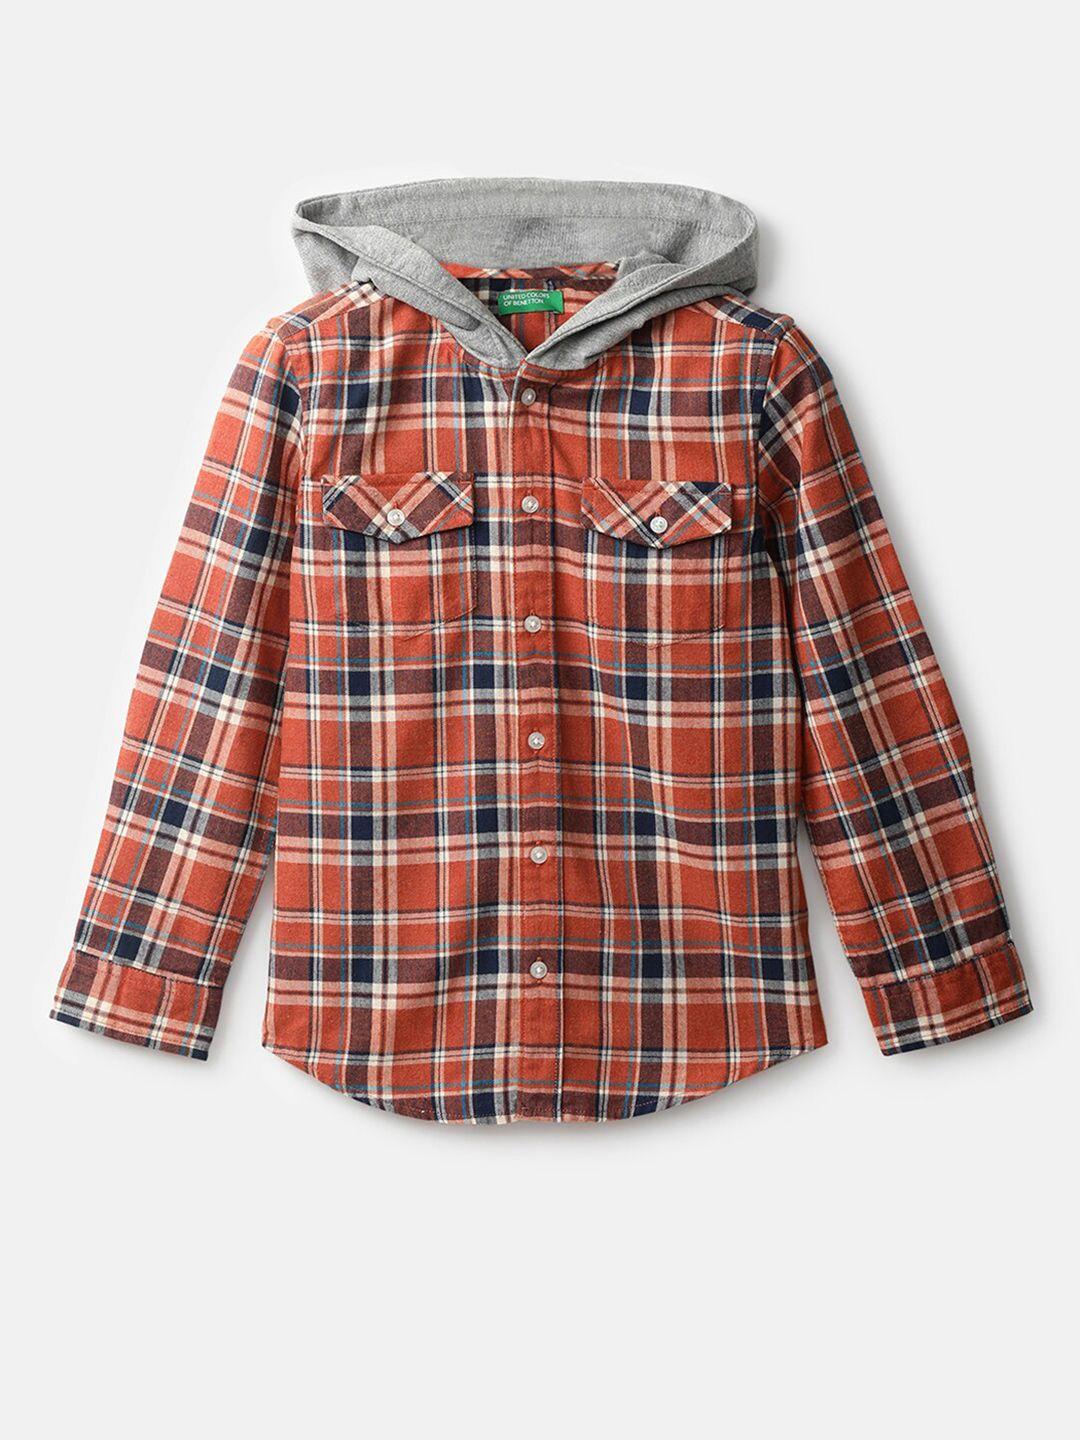 united colors of benetton boys rust tartan checked casual cotton shirt